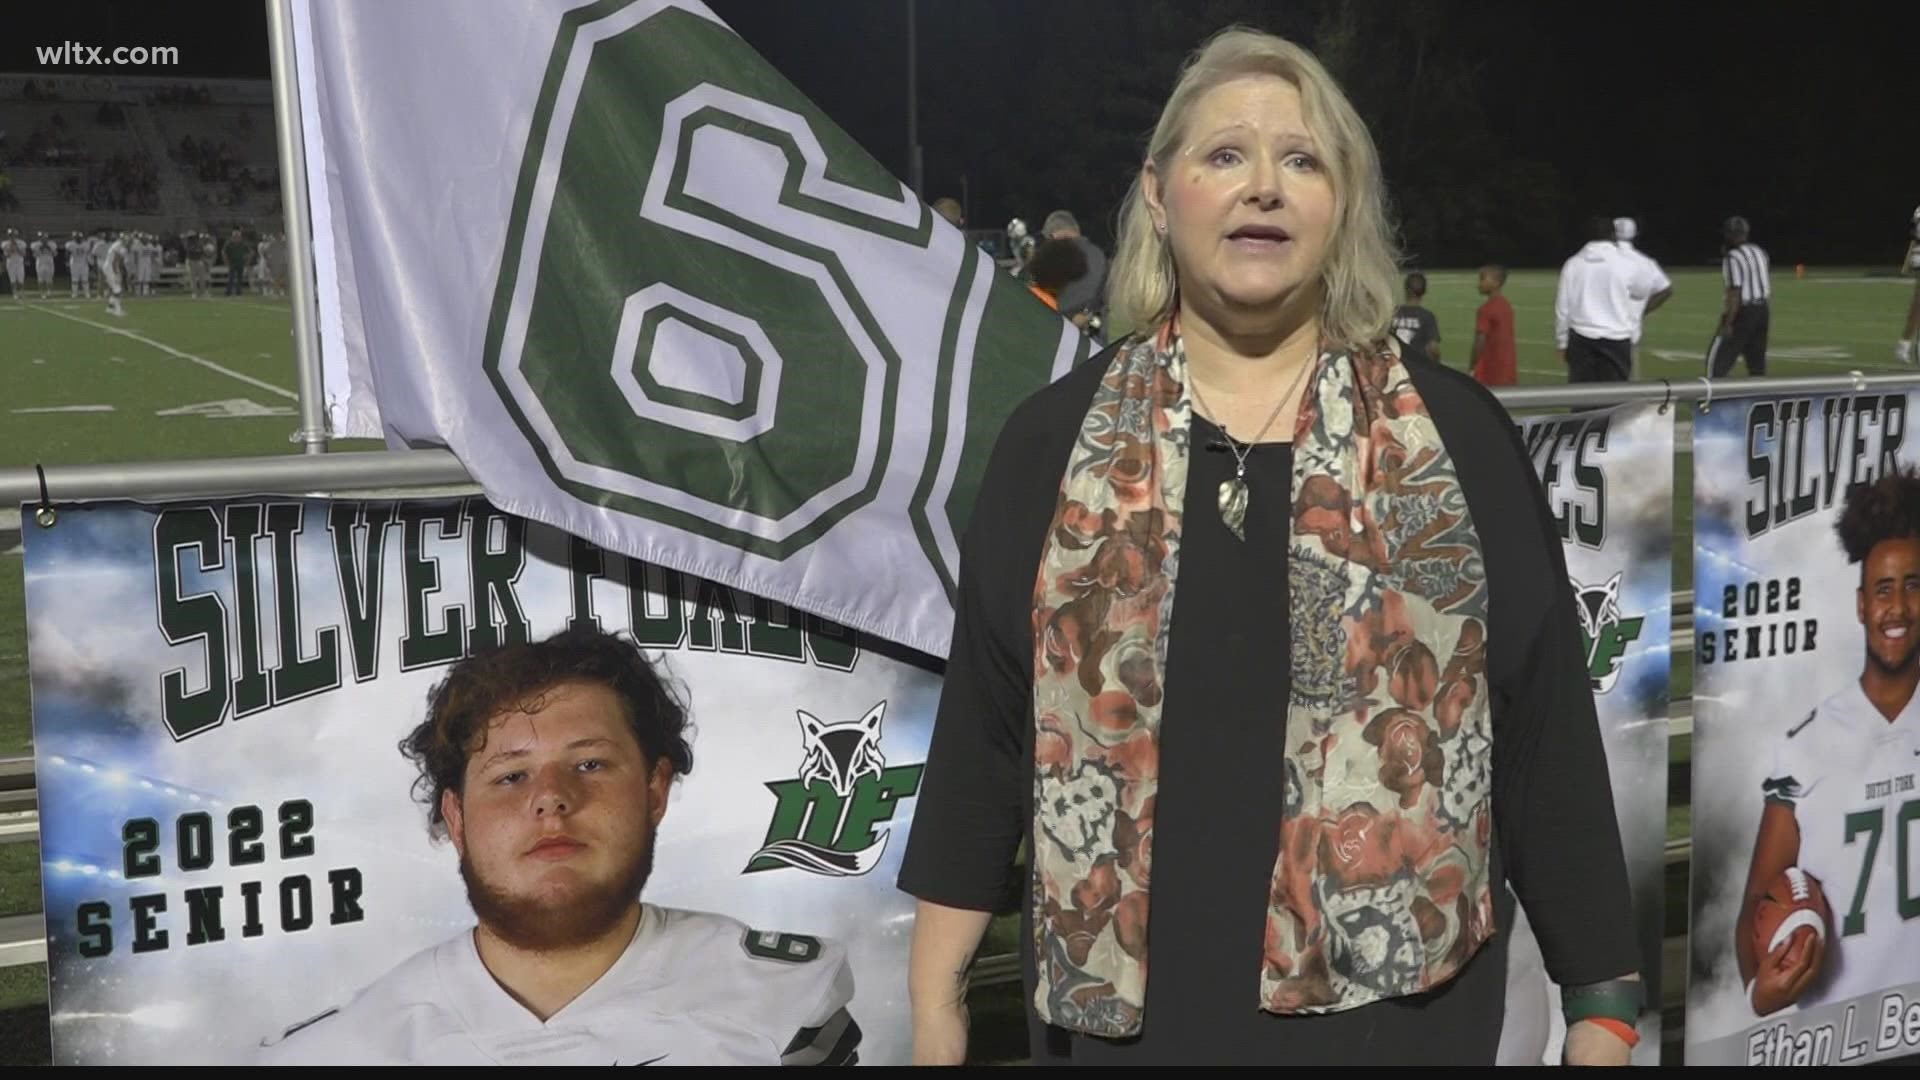 There was an eruption of emotion at Dutch Fork High School on Friday night after beloved football player Jack Alkhatib was crowned homecoming king posthumously.